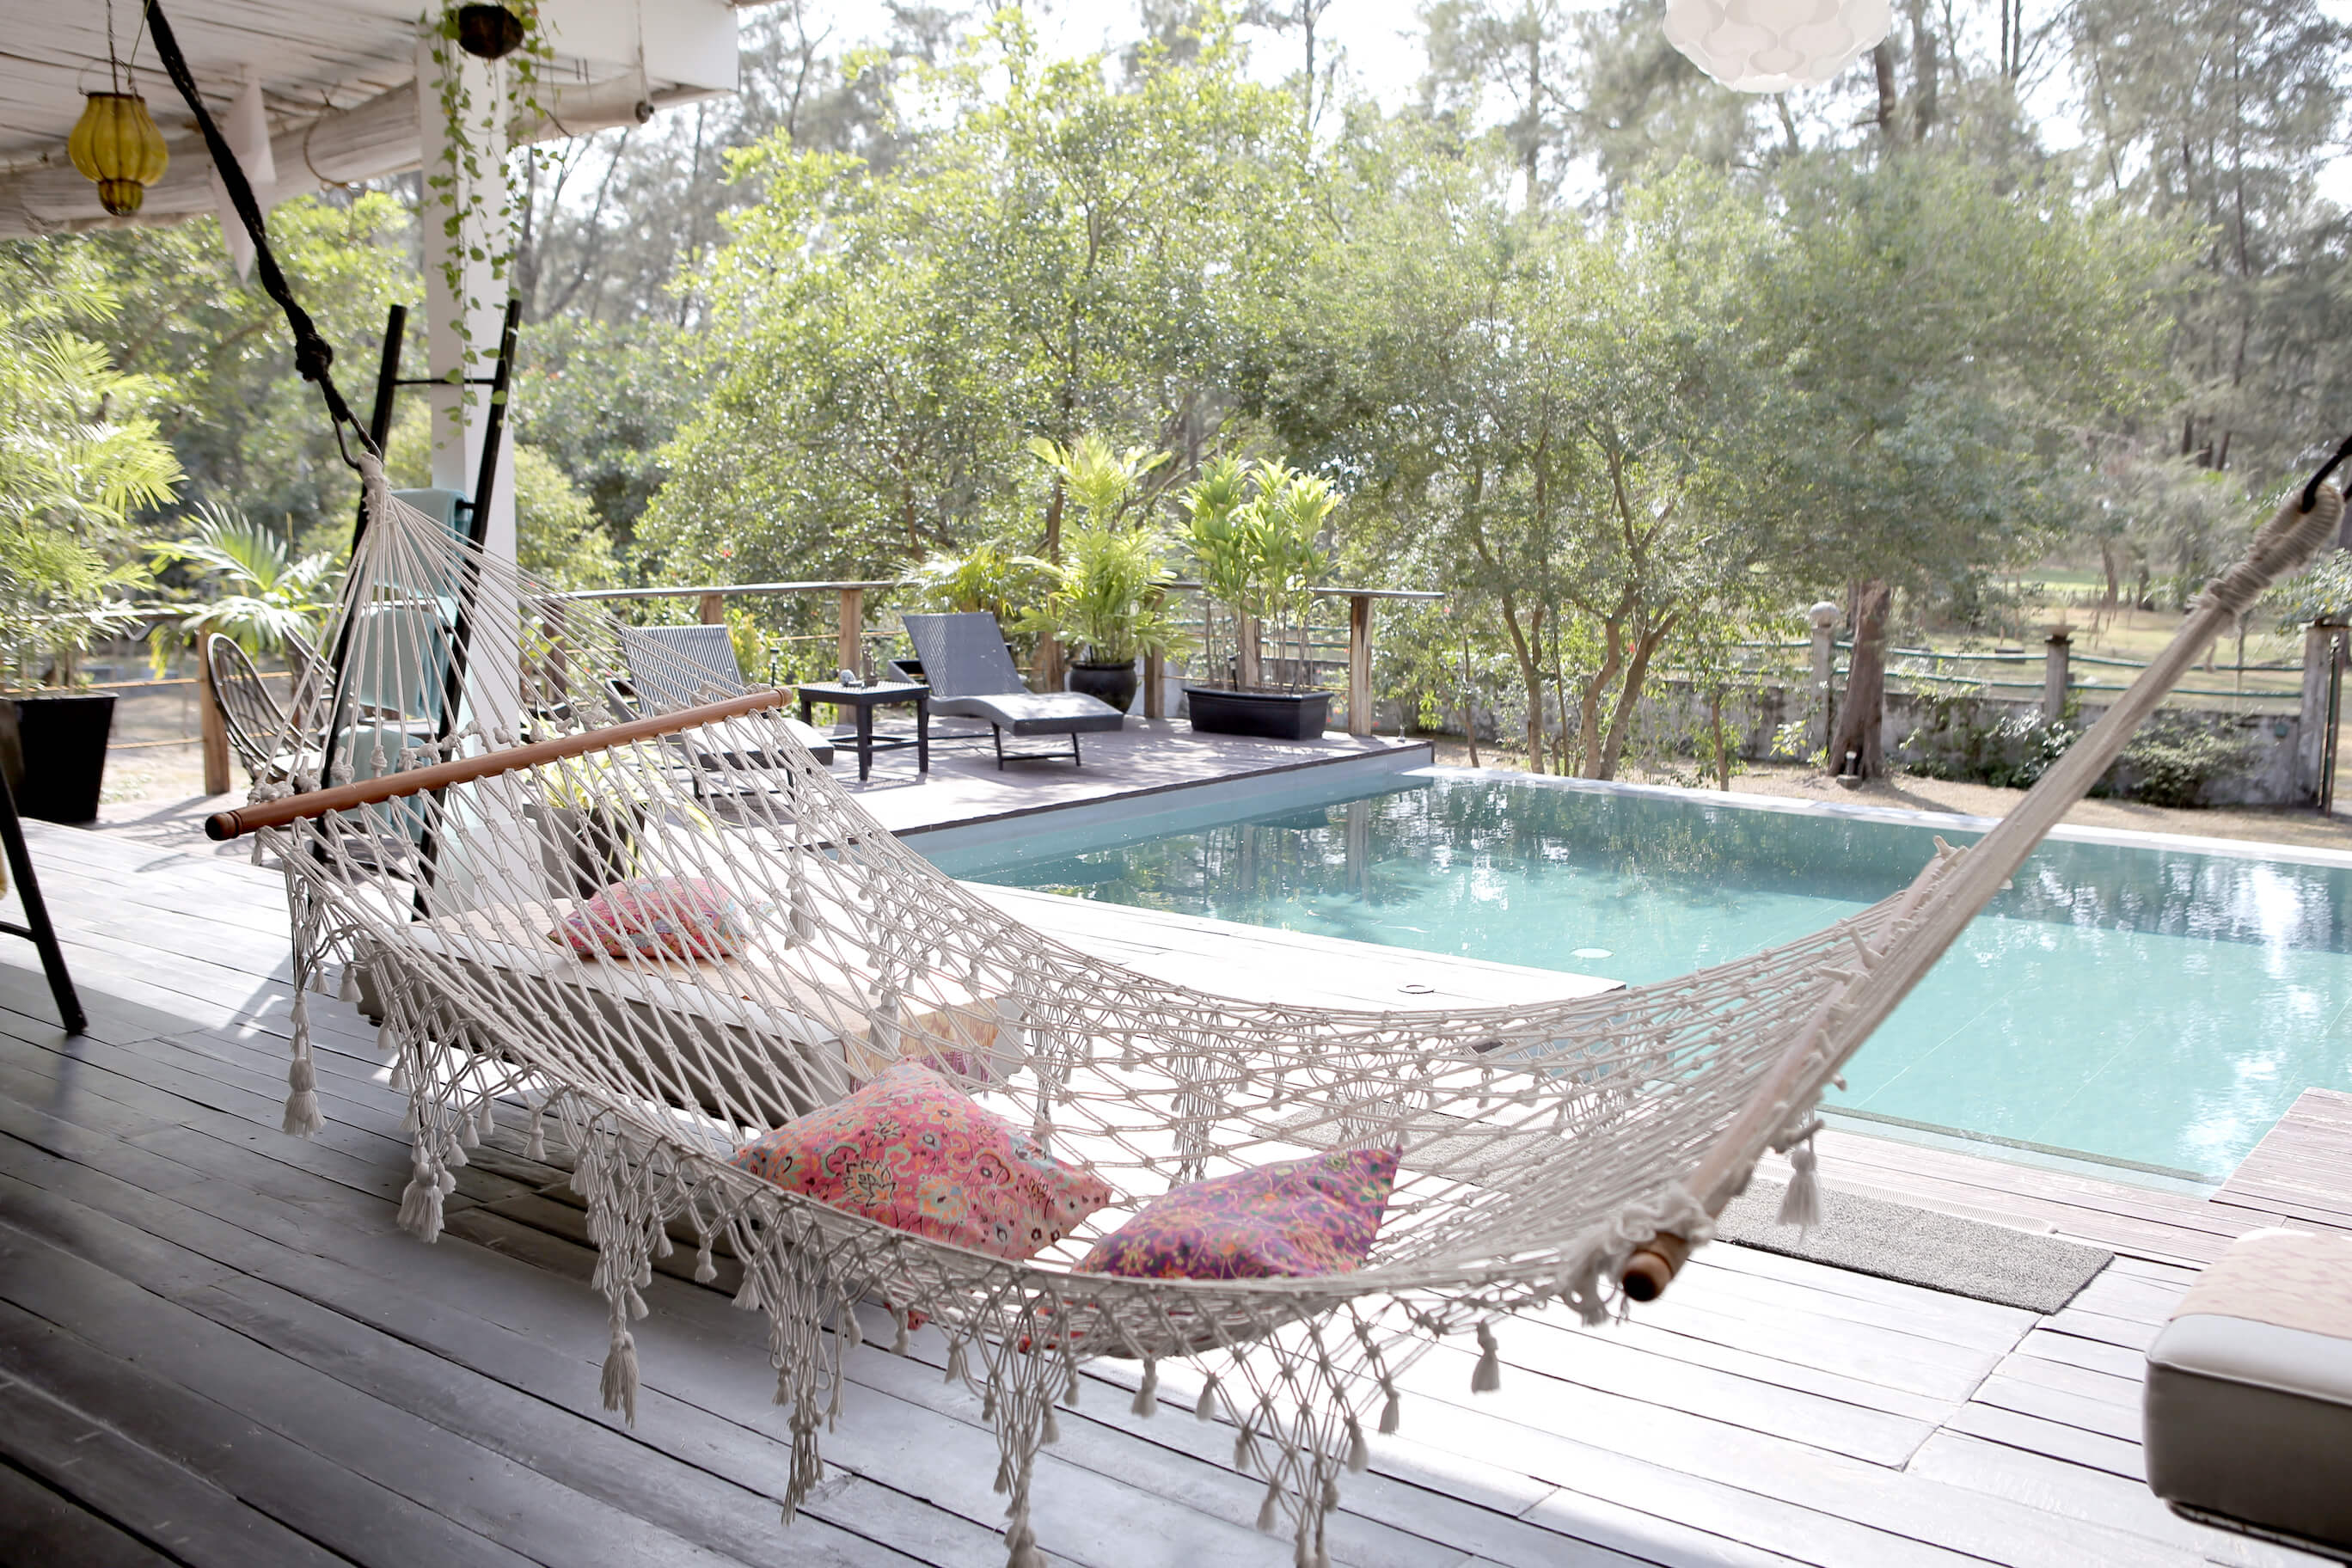 A hammock with a pool in the background. 